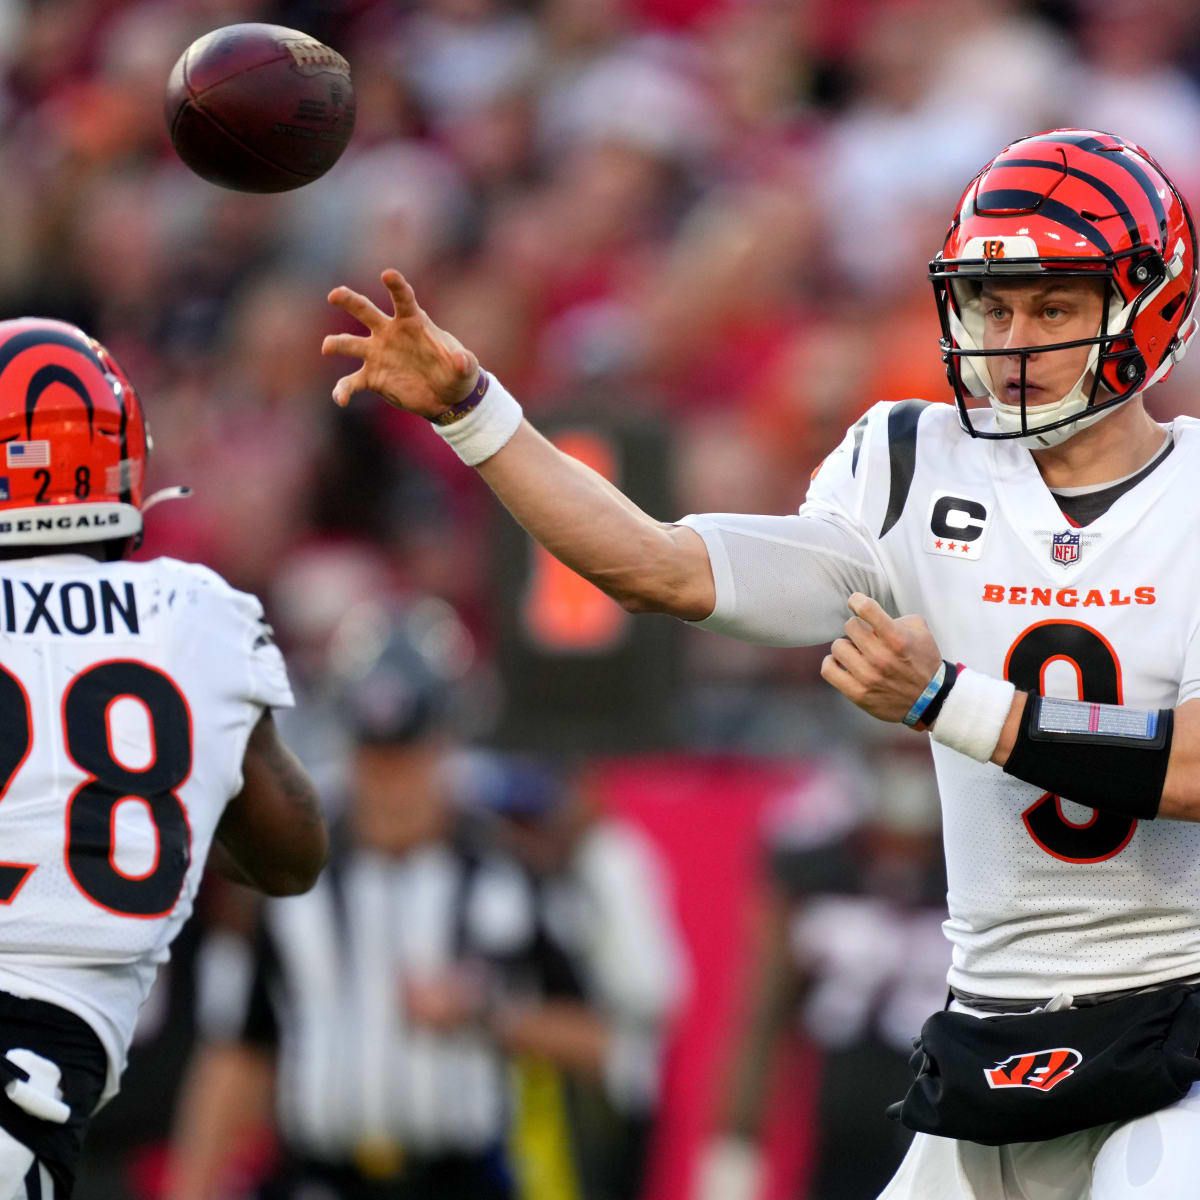 Bengals vs. Patriots live stream: TV channel, how to watch NFL on